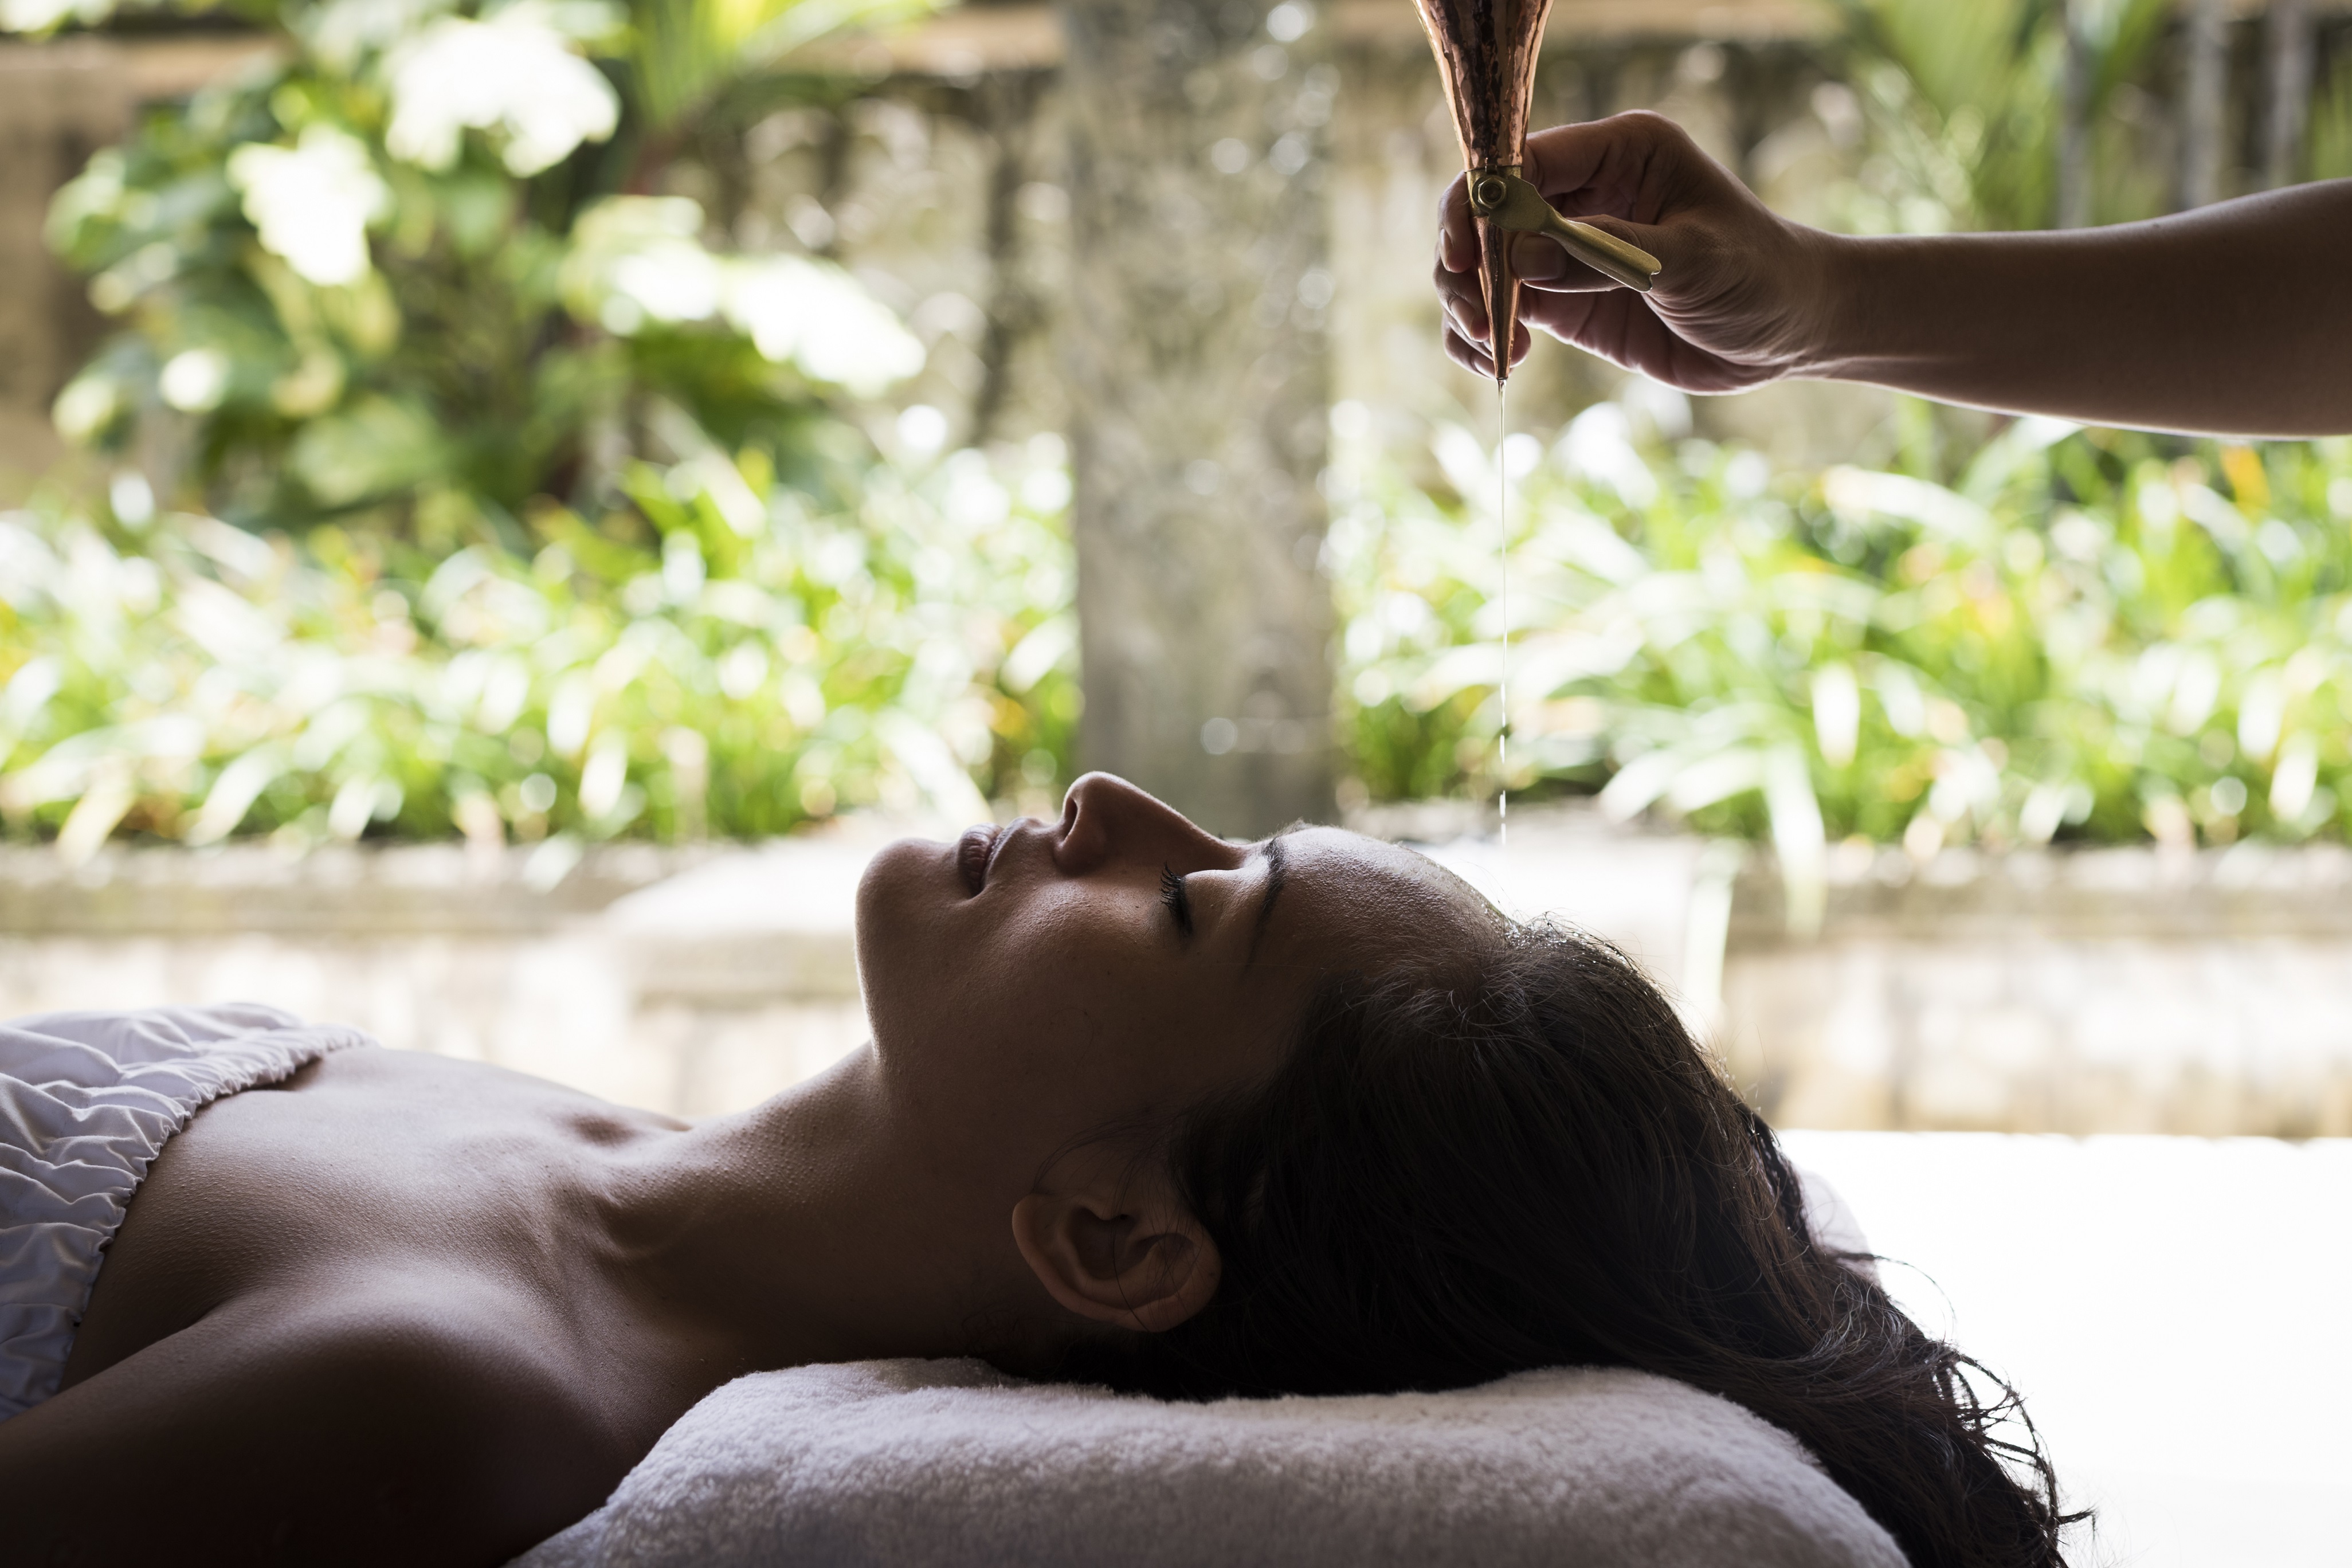 Indulging in opulence: Luxurious Extras to Elevate Your Spa Journey